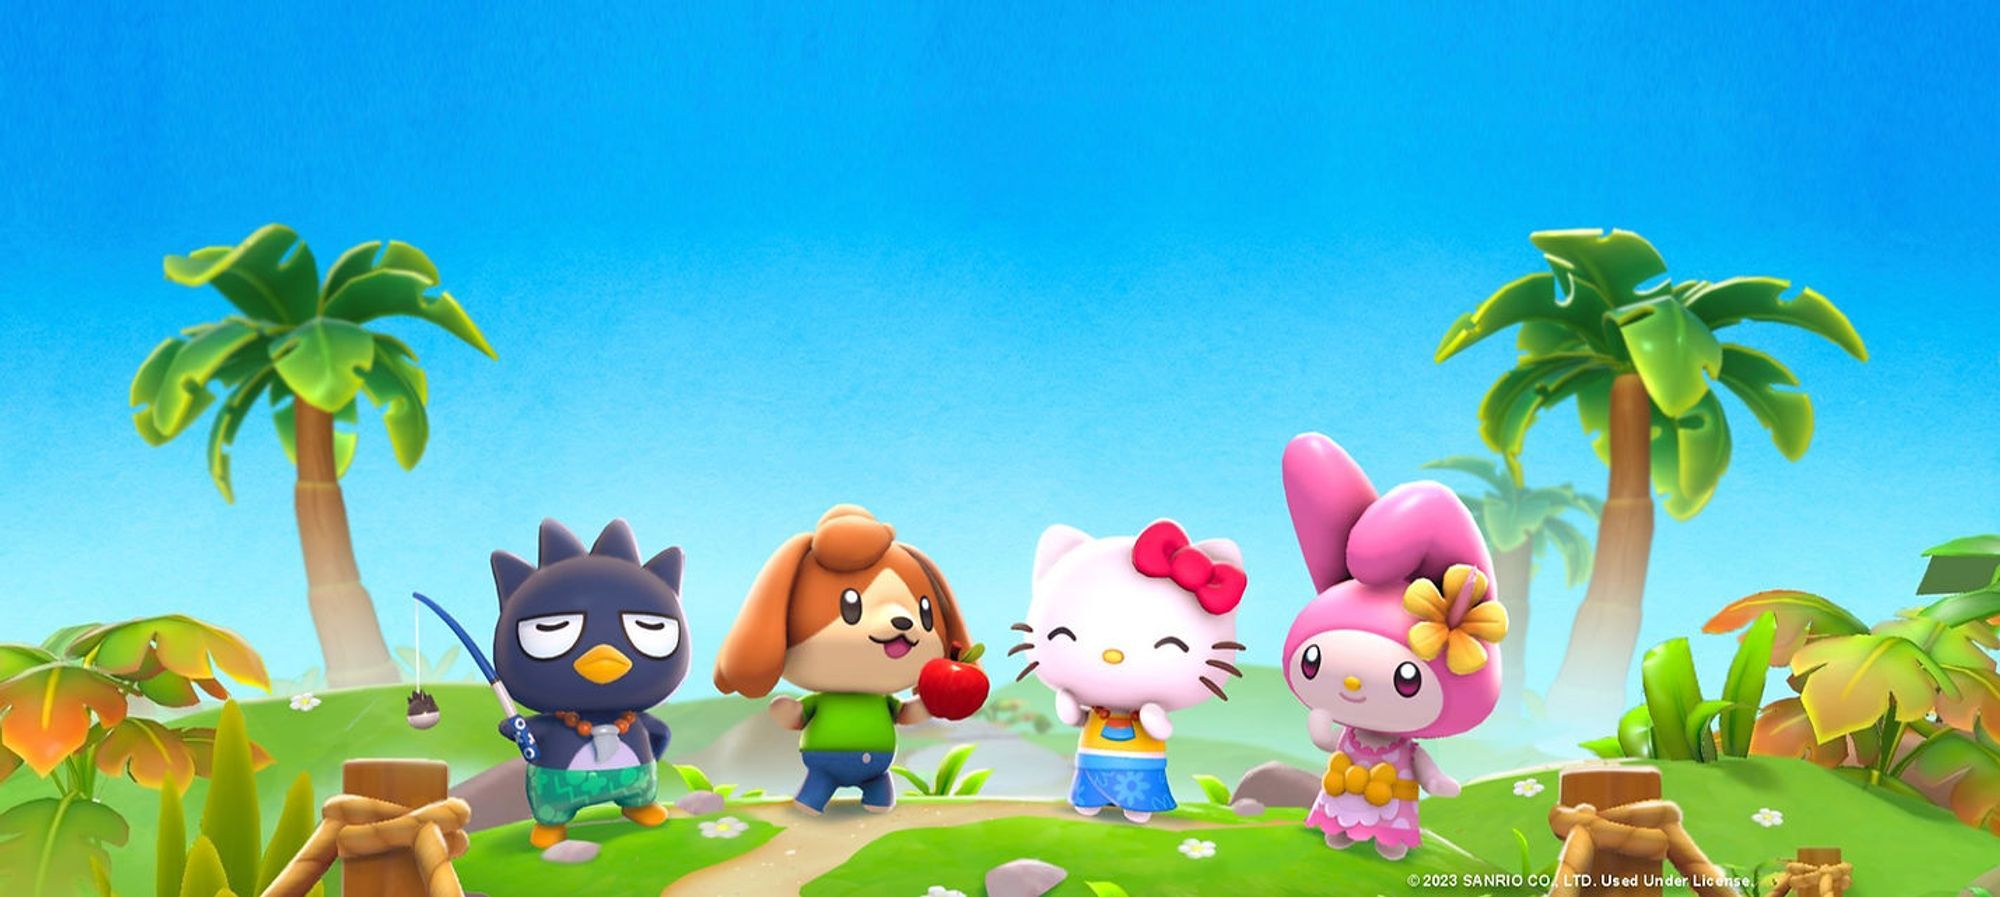 hello kitty island adventure is basically “animal crossing but make it sanrio” for iOS gamers